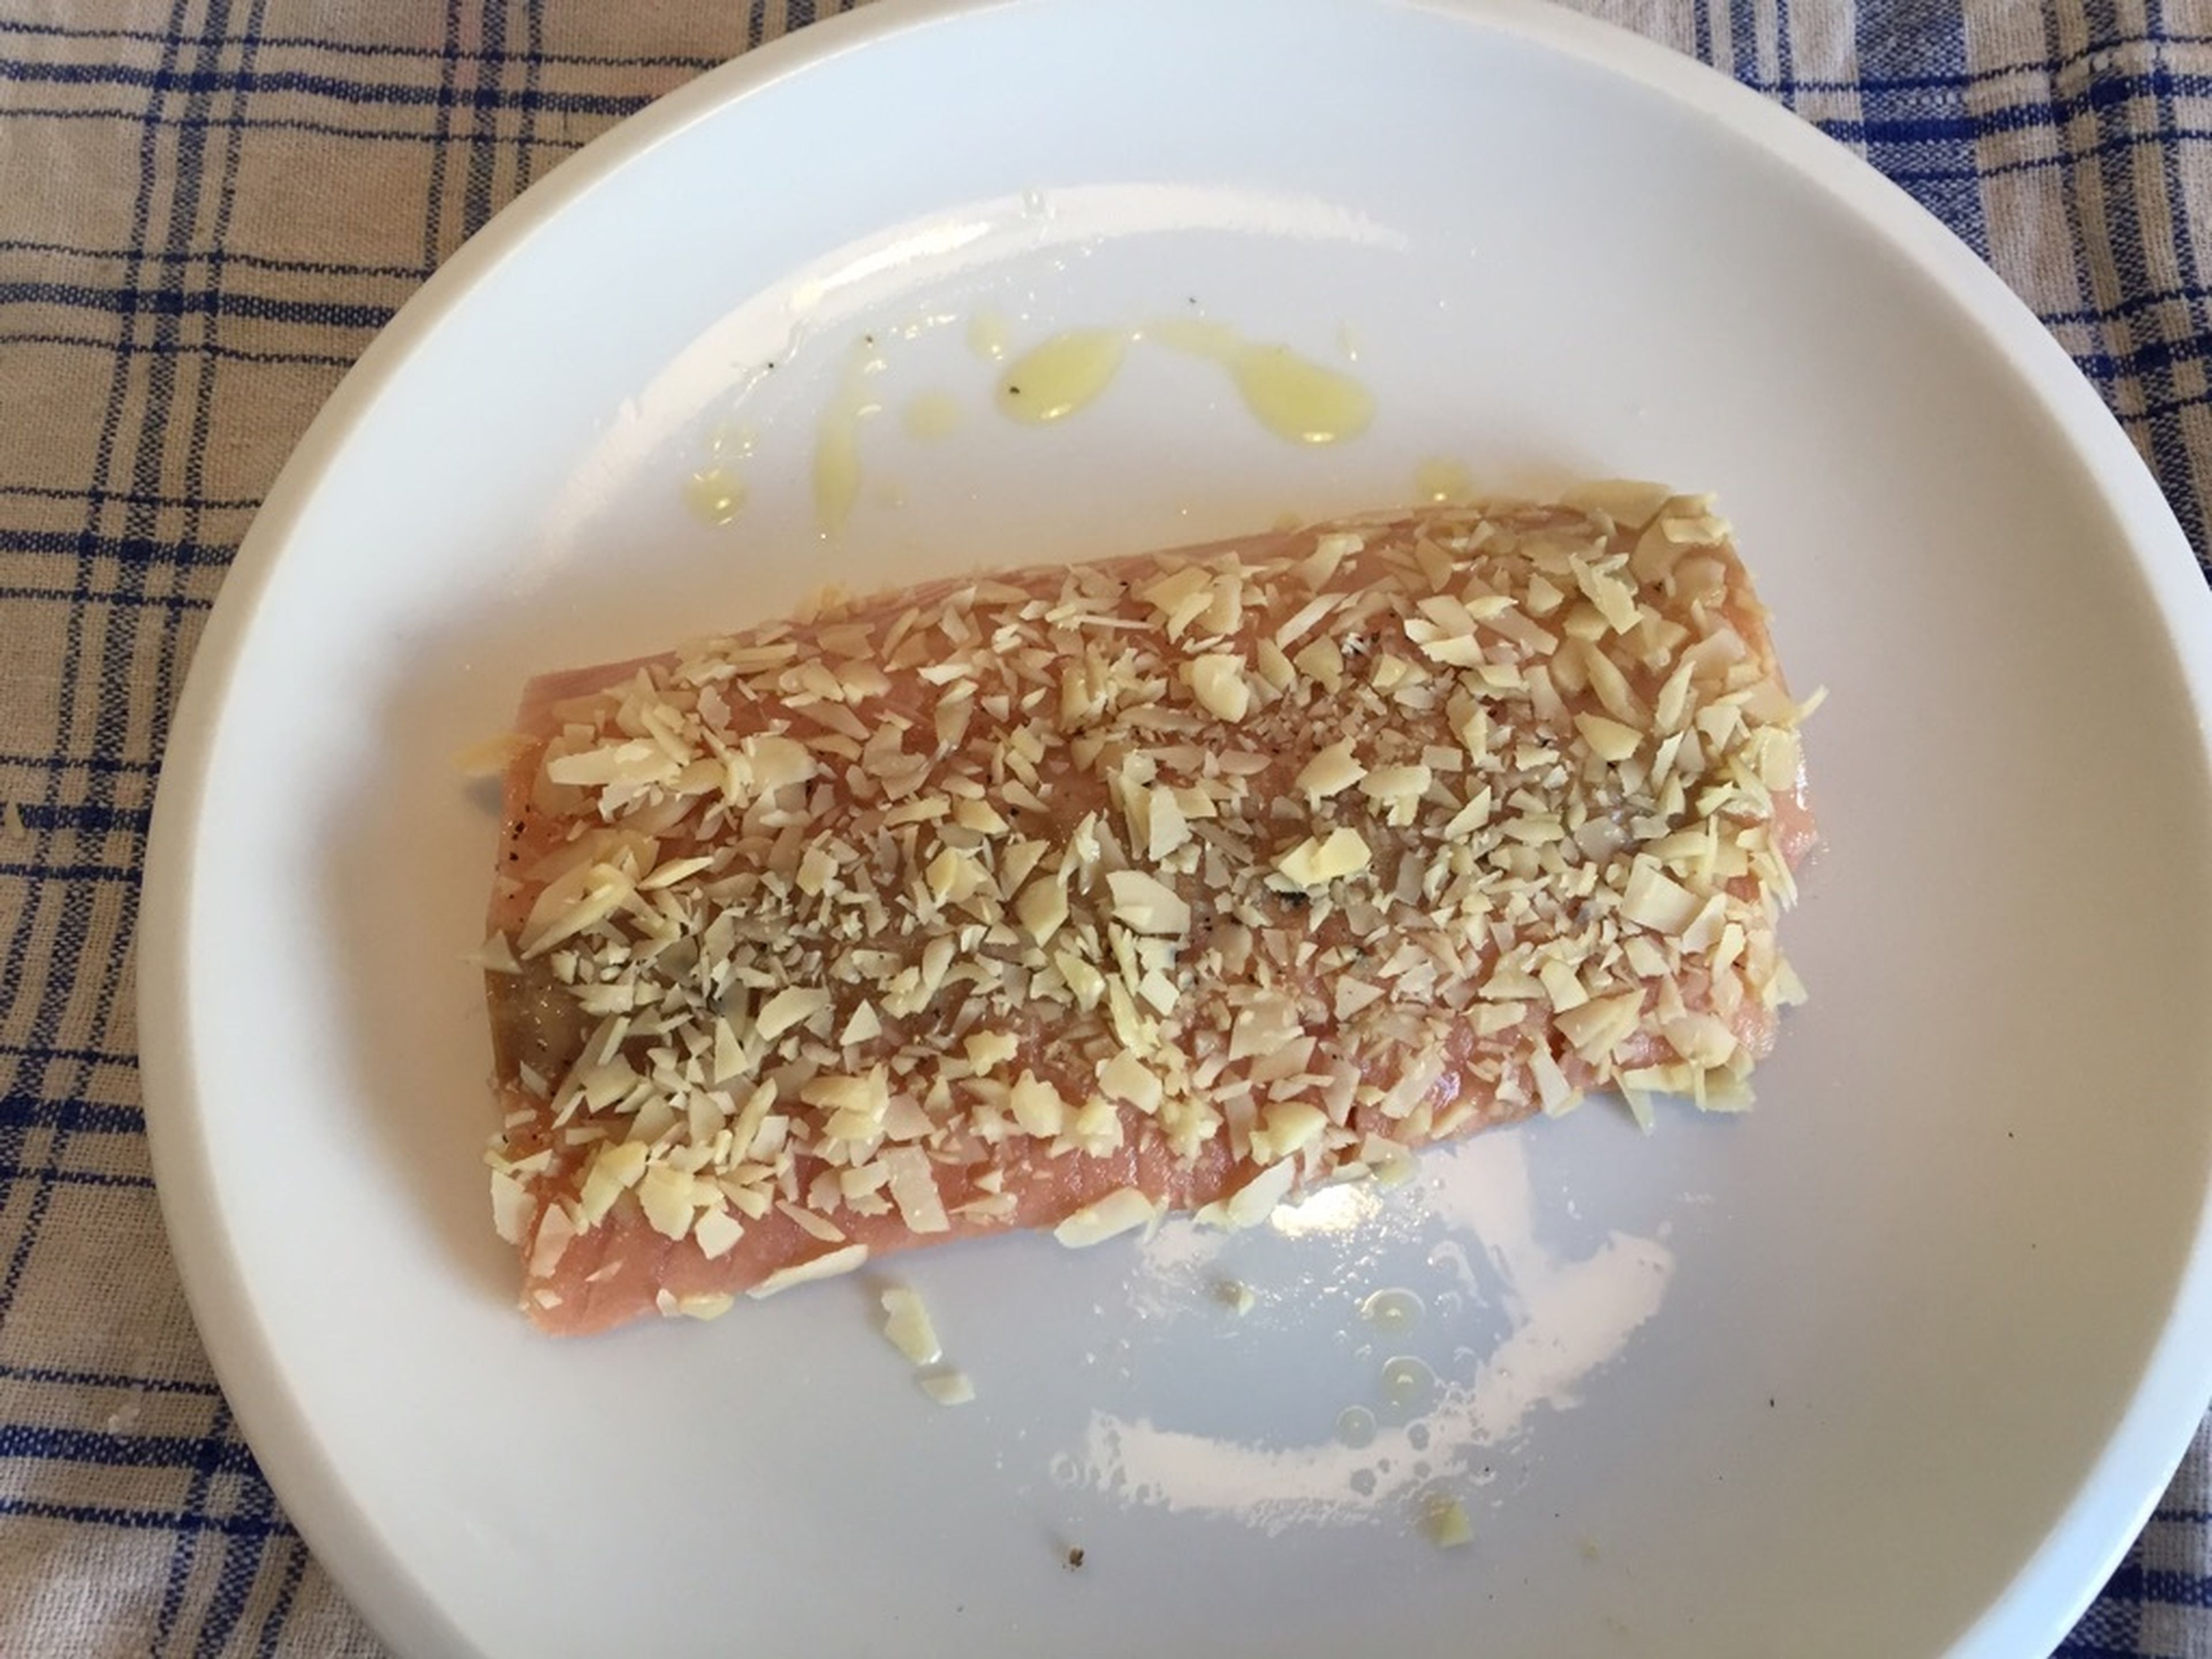 Roll fish in almonds and press gently to seal. Preheat a small frying pan over medium heat and coat with the remaining olive oil.